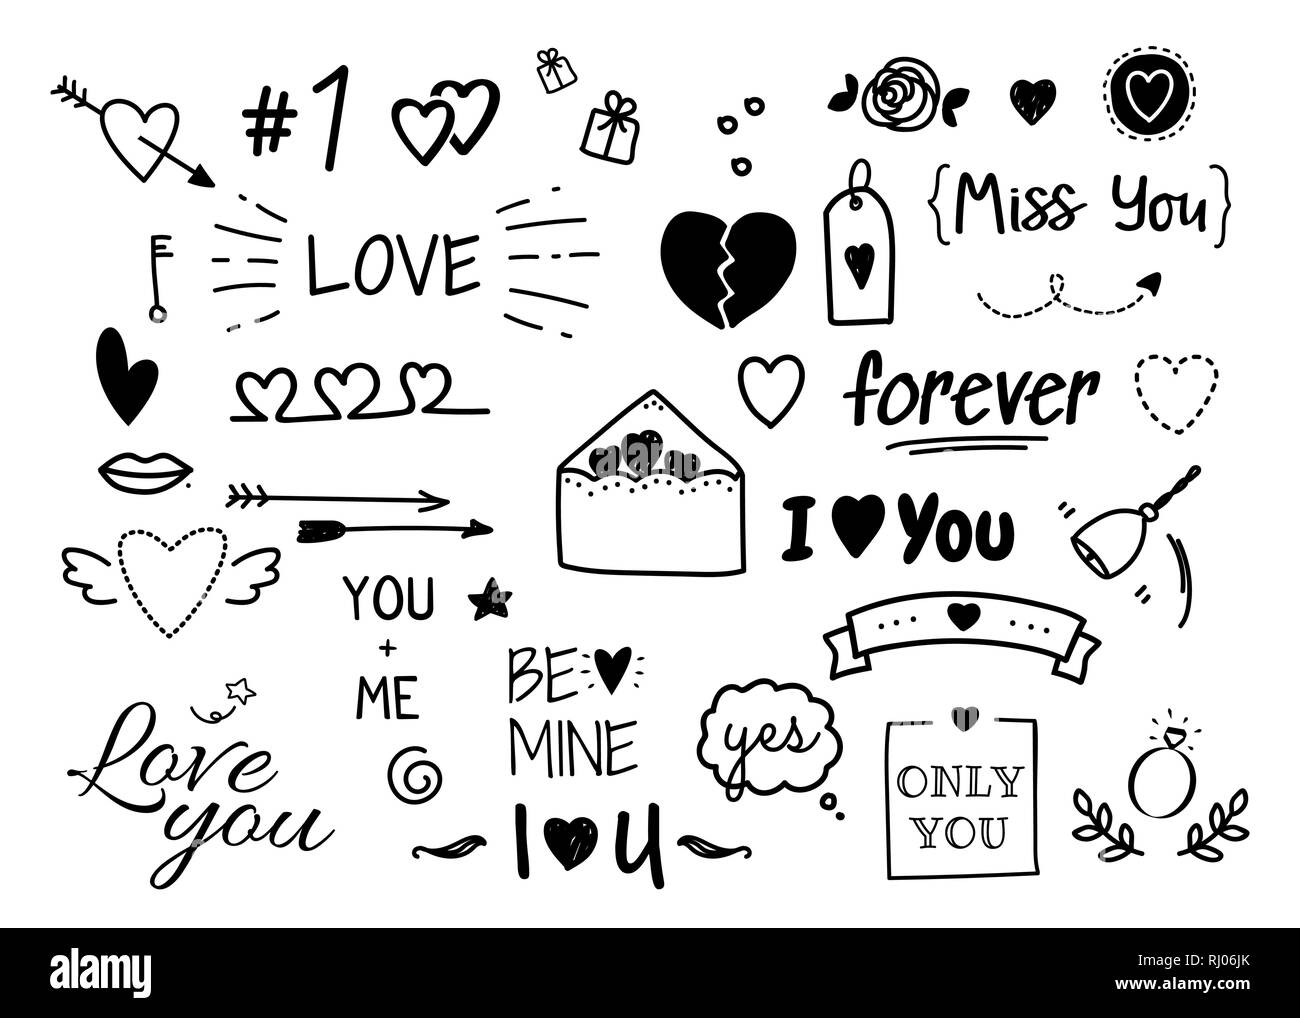 Vector collection with heart, envelope, key, arrow, lettering text. Set of hand drawn doodle love elements for Valentine s Day card. Stock Vector